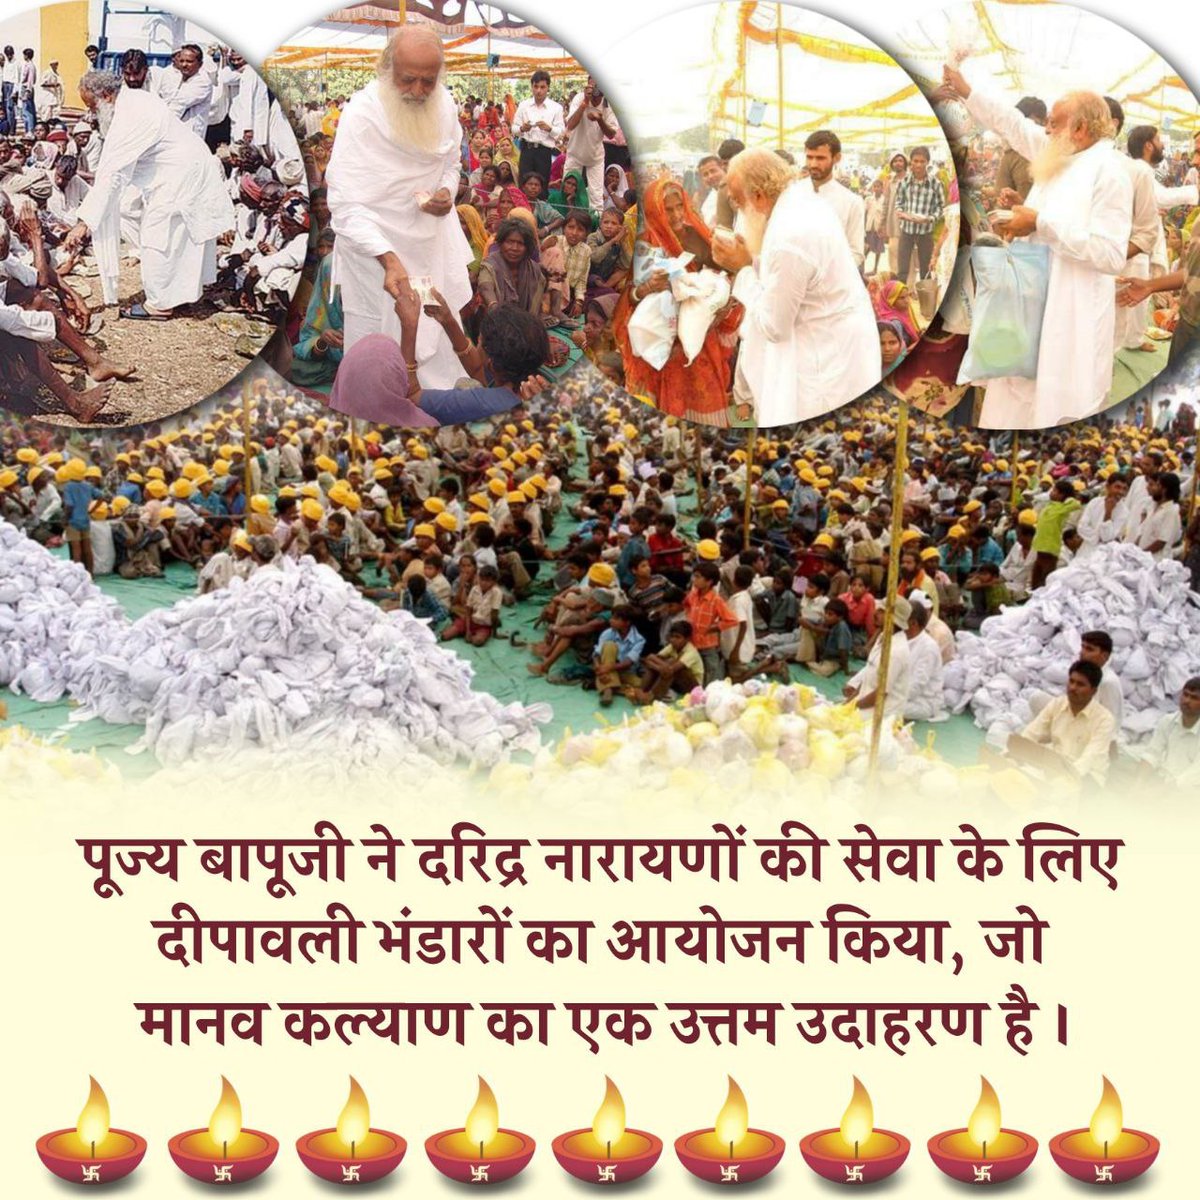 #प्राणिमात्र_के_हितैषी Sant Shri Asharamji Bapu has been engaged in the divine work of upliftment of society & nation for the last 50yrs‼️1000s of service activities are run under Bapuji's guidance even today in all the places‼️He is a living legacy & Inspirational for Society ‼️